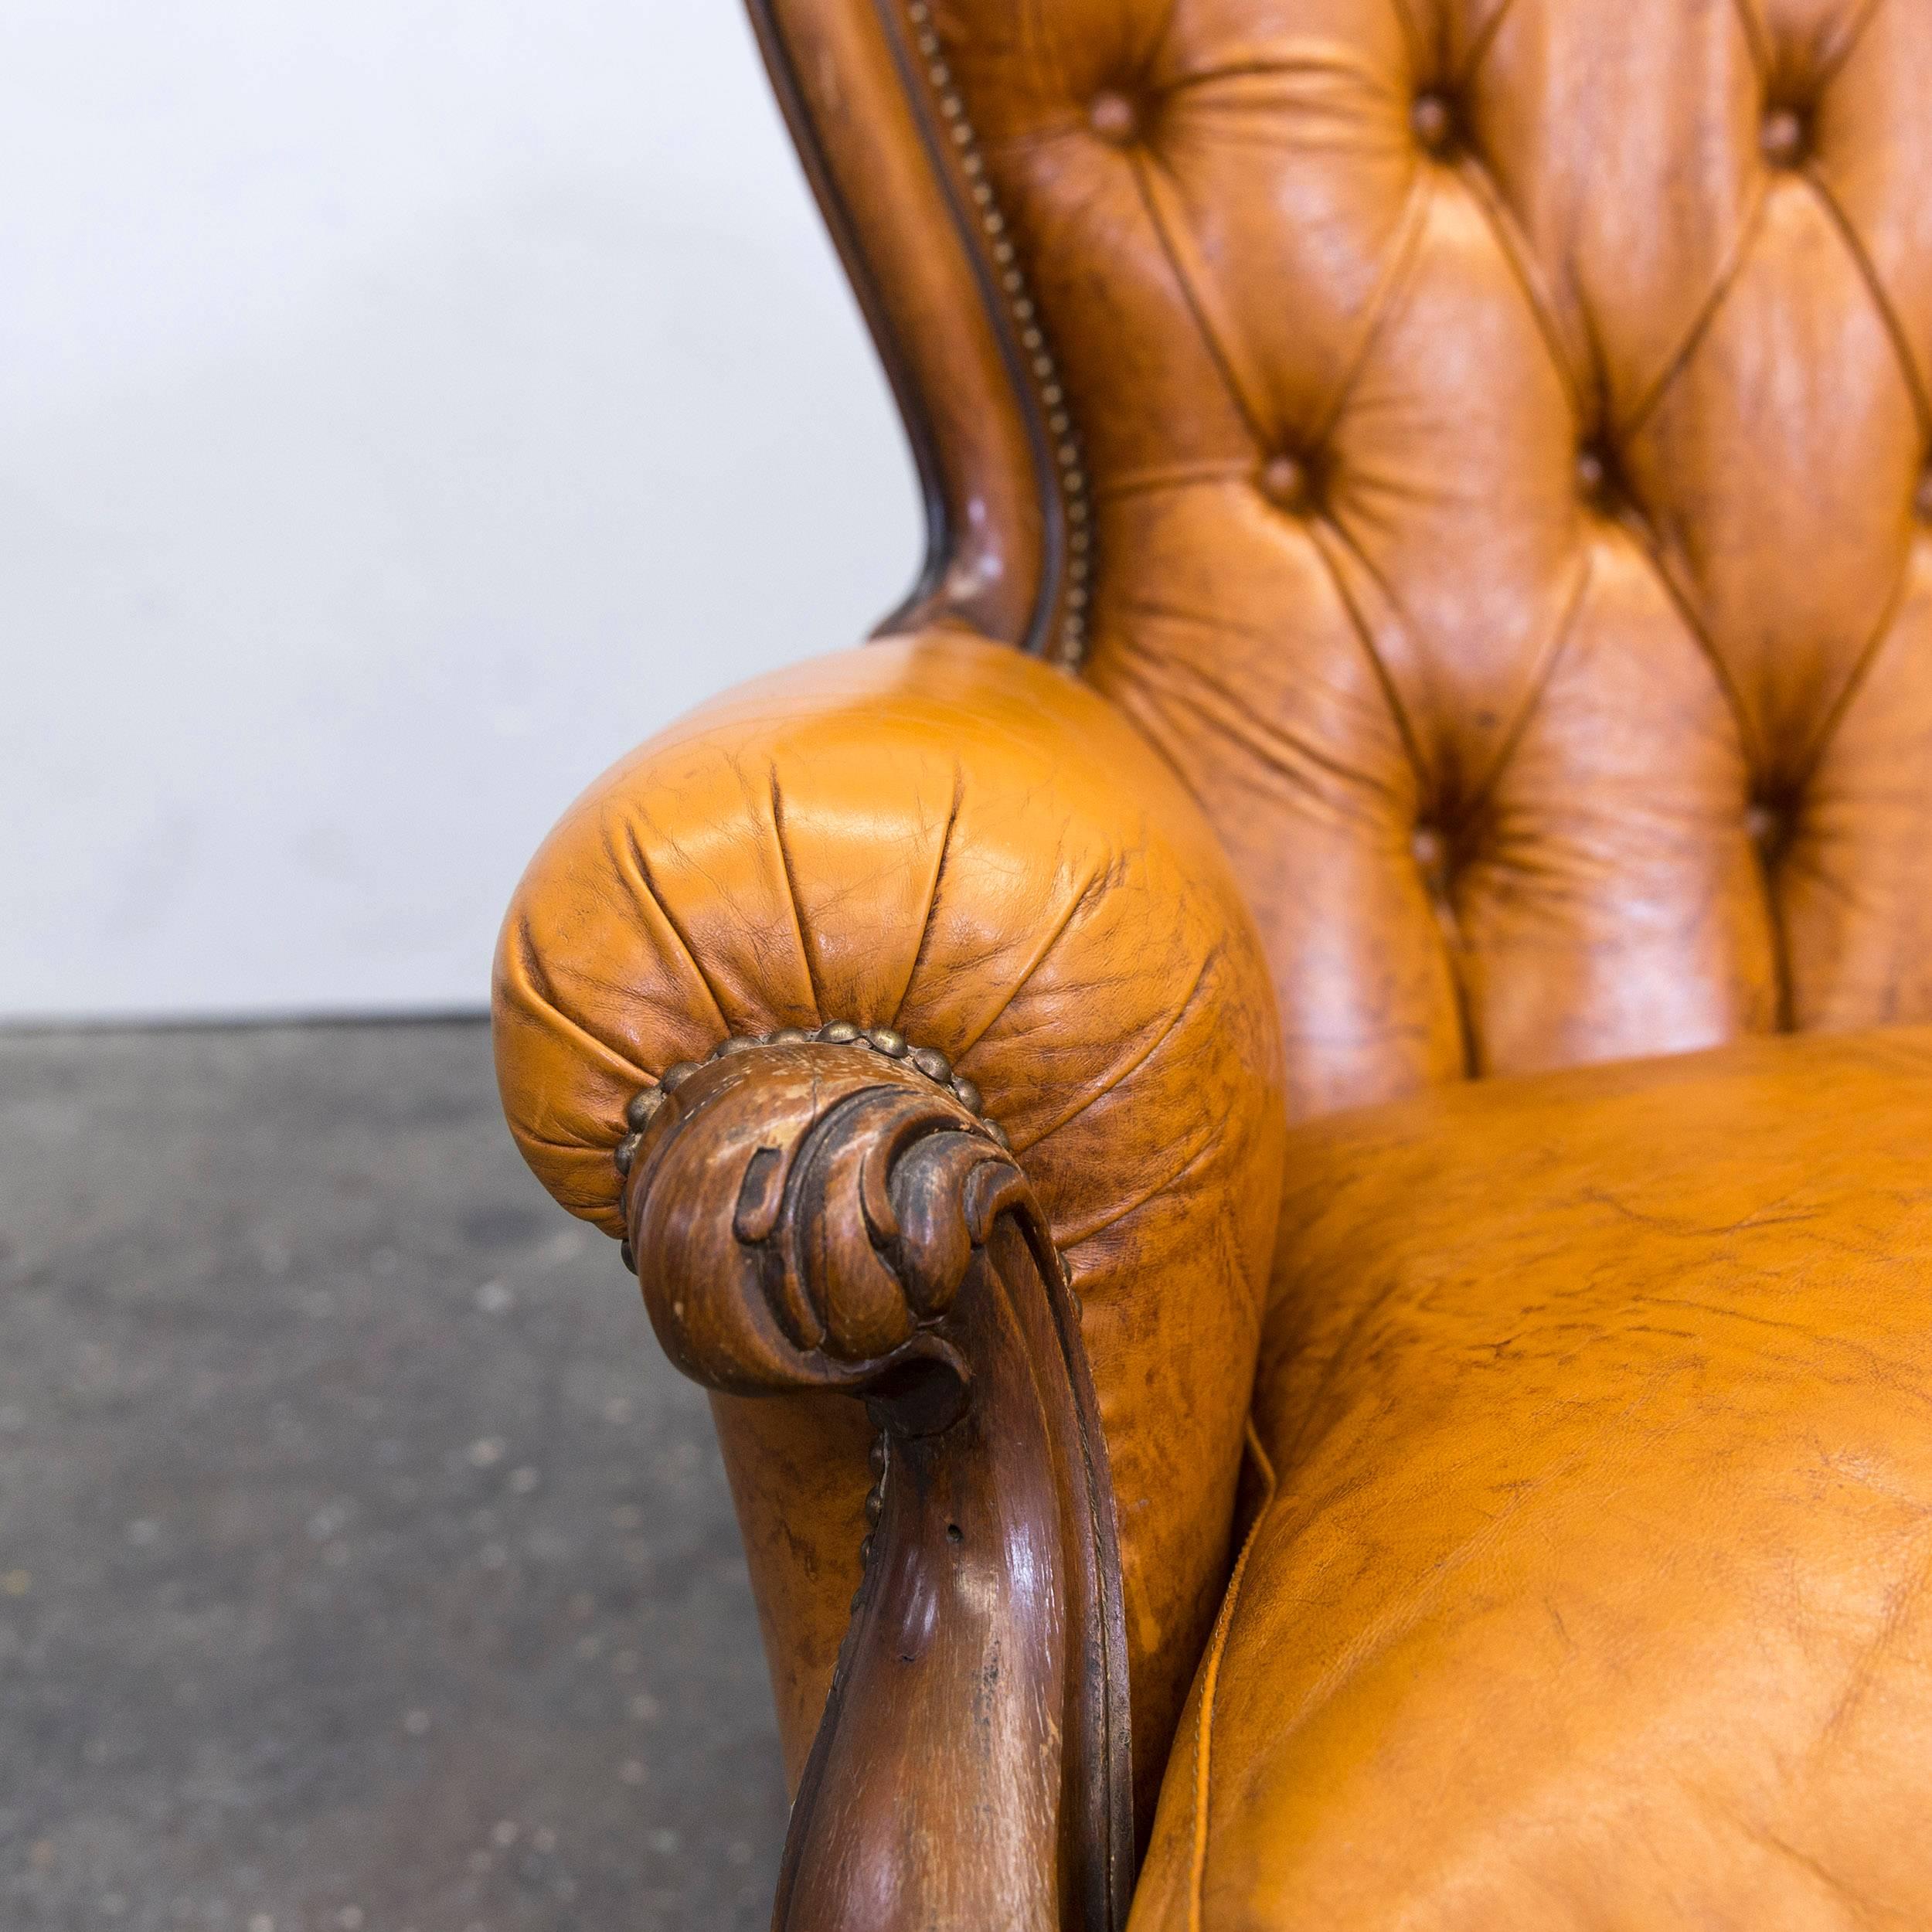 British Chesterfield Leather Armchair Cognac Brown One-Seat Couch Wood Retro Vintage